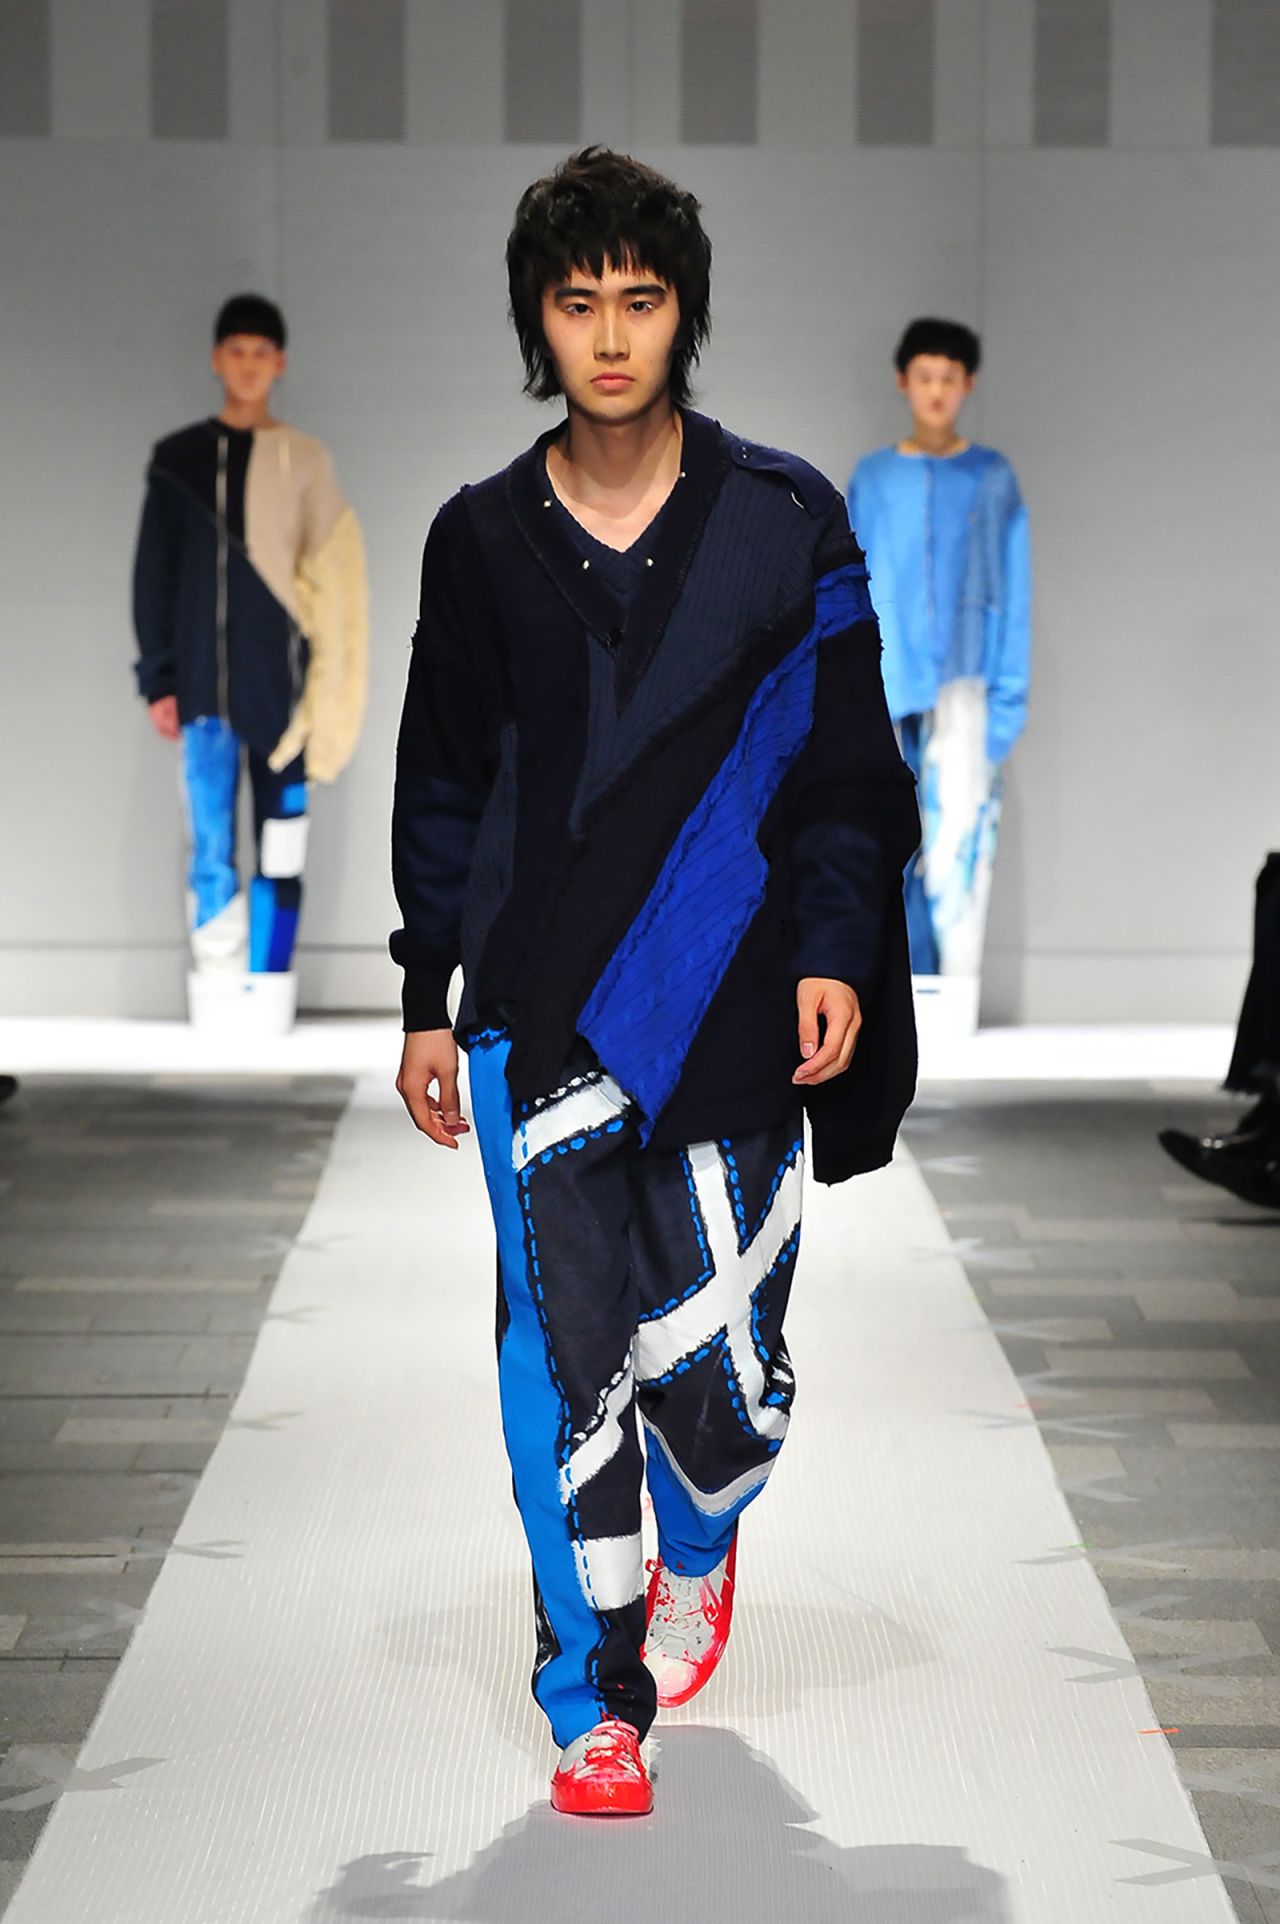 Another look from Nisai's Autumn-Winter 2021 collection that was featured at Tokyo's Rakuten Fashion Week. 